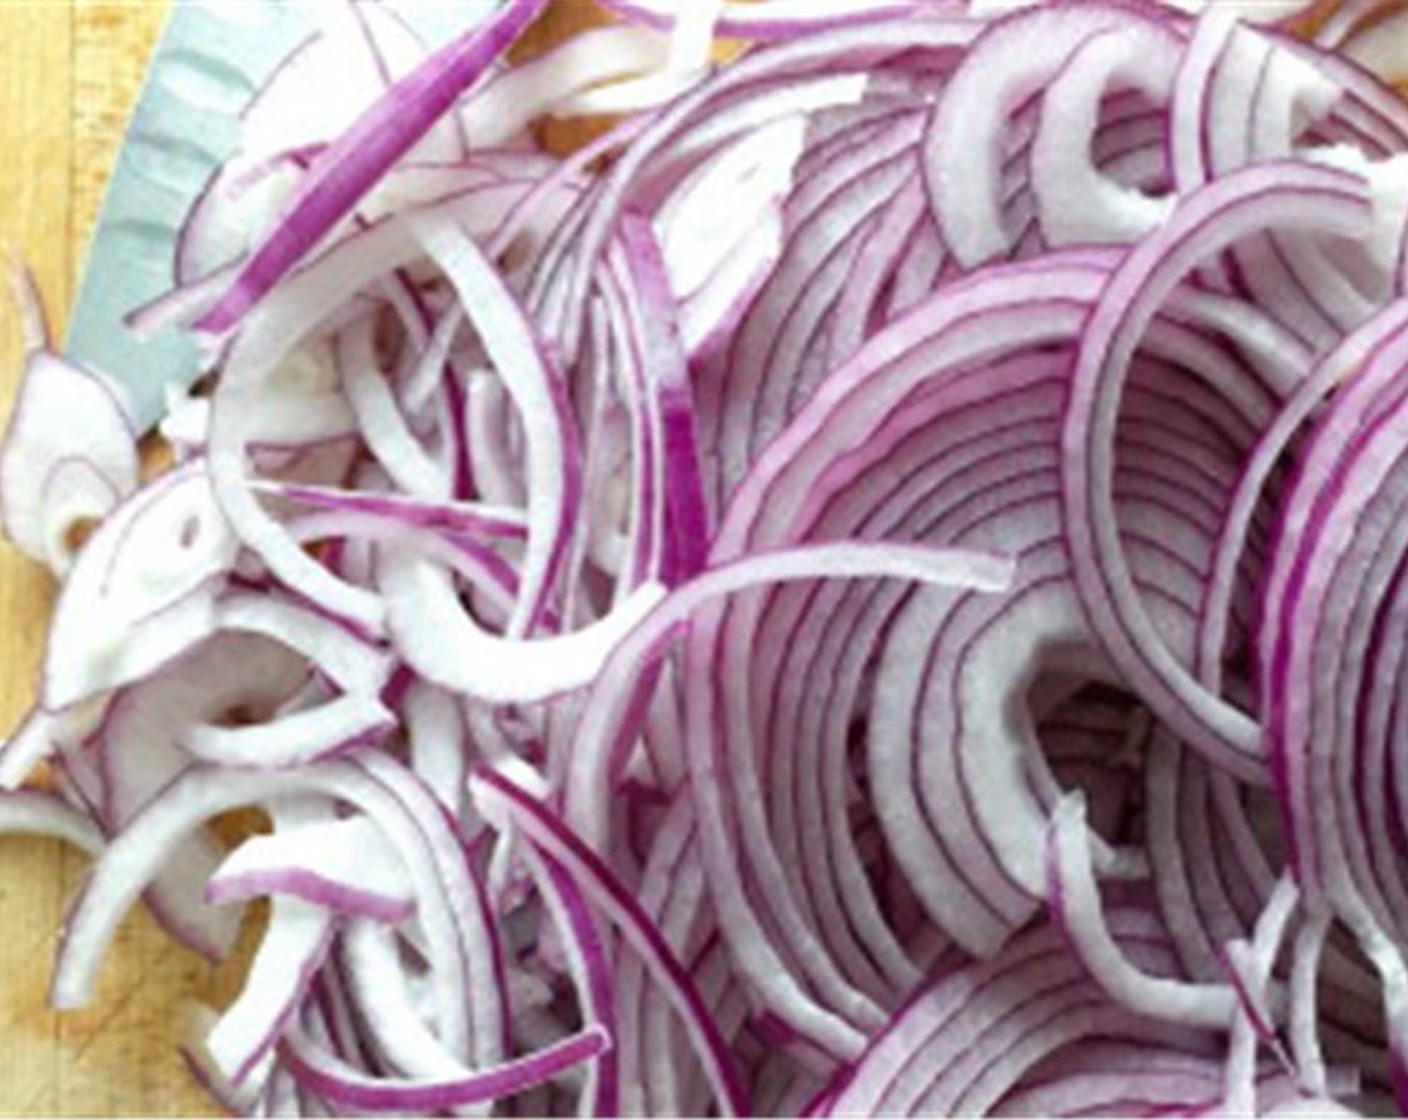 step 2 For balsamic onions, begin by thinly slicing the Red Onions (2). In a hot pan, add Olive Oil (2 Tbsp) and cook the onions over a medium-high flame until they begin to brown a bit. Add Granulated Sugar (1 Tbsp), Salt (to taste), and Ground Black Pepper (to taste) and turn the heat down to medium.